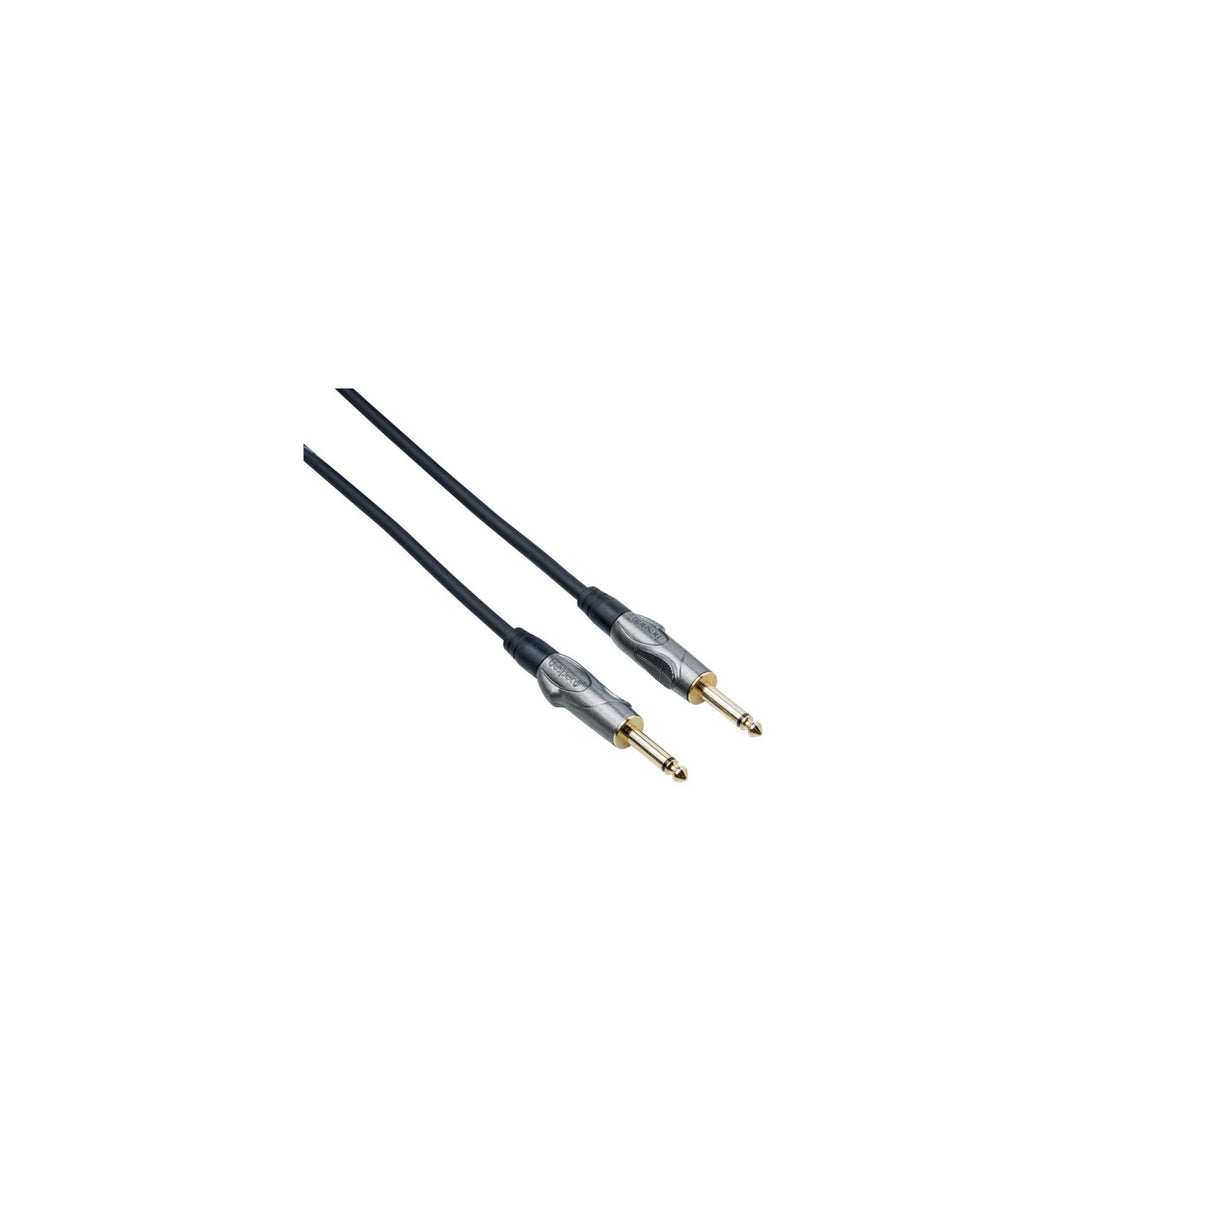 Bespeco TT100 Titanium Series Straight Angle 1/4 Inch to 1/4 Inch Guitar Cable, 3 Foot